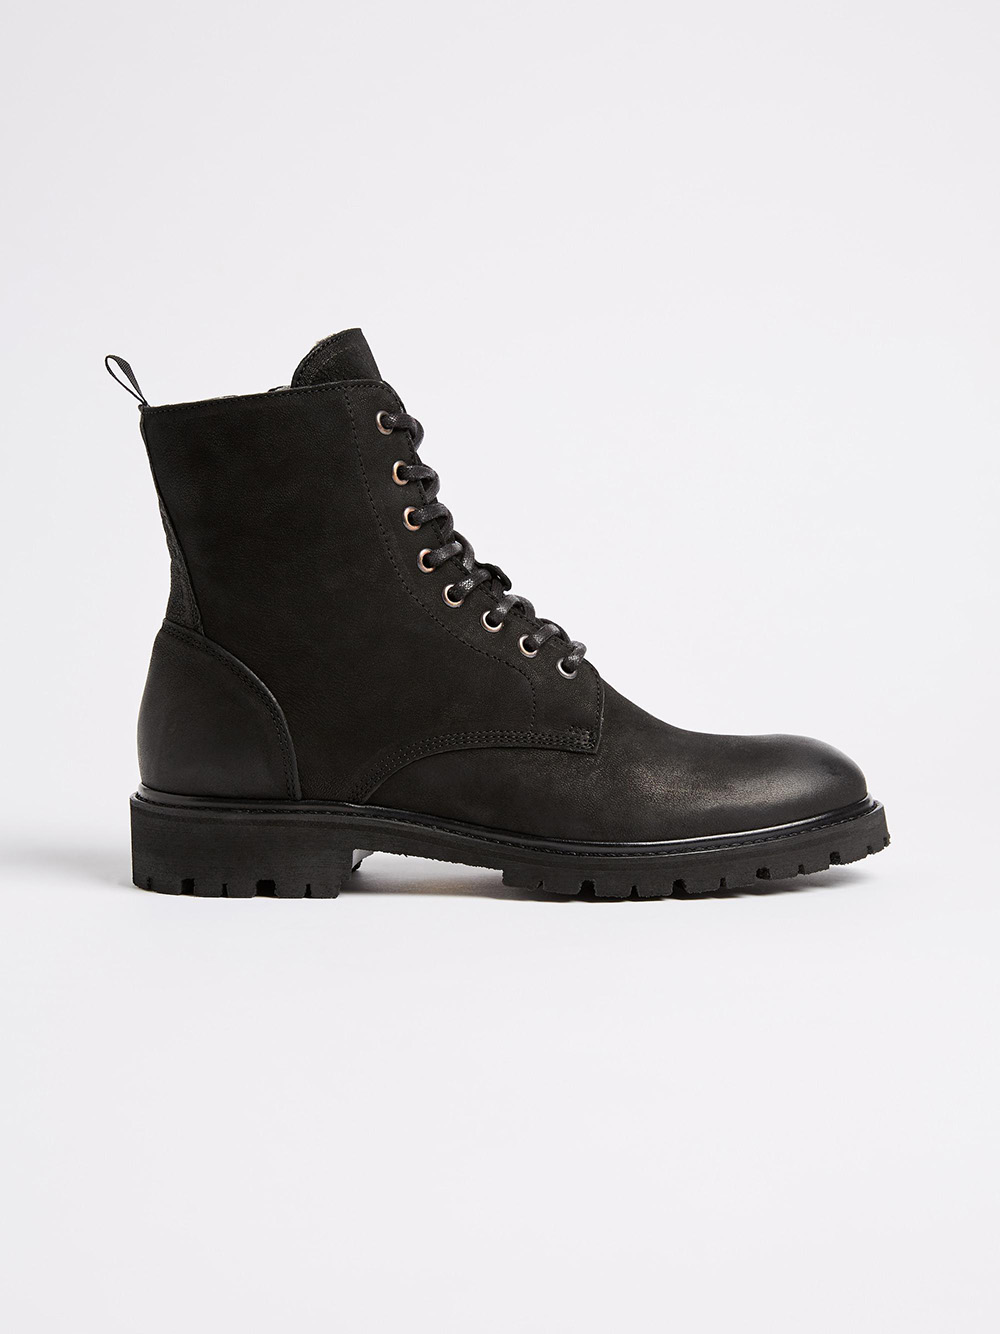 frank-and-oak-black-Vibram-Outsole-Lined-Winter-Boot-Black